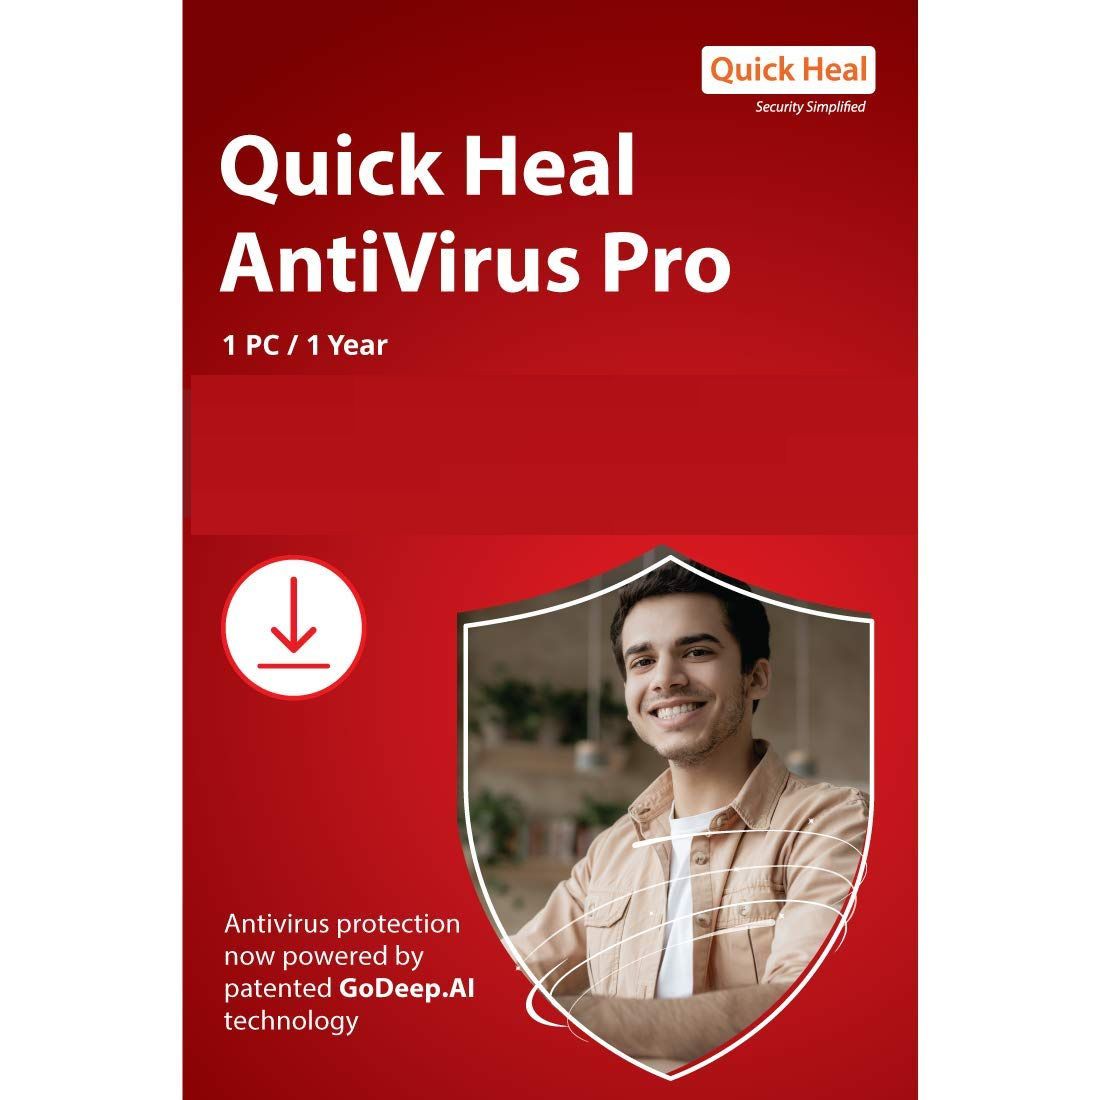     			Quick Heal Antivirus Pro Latest Version ( 1 PC / 1 Year ) - Activation Code-Email Delivery